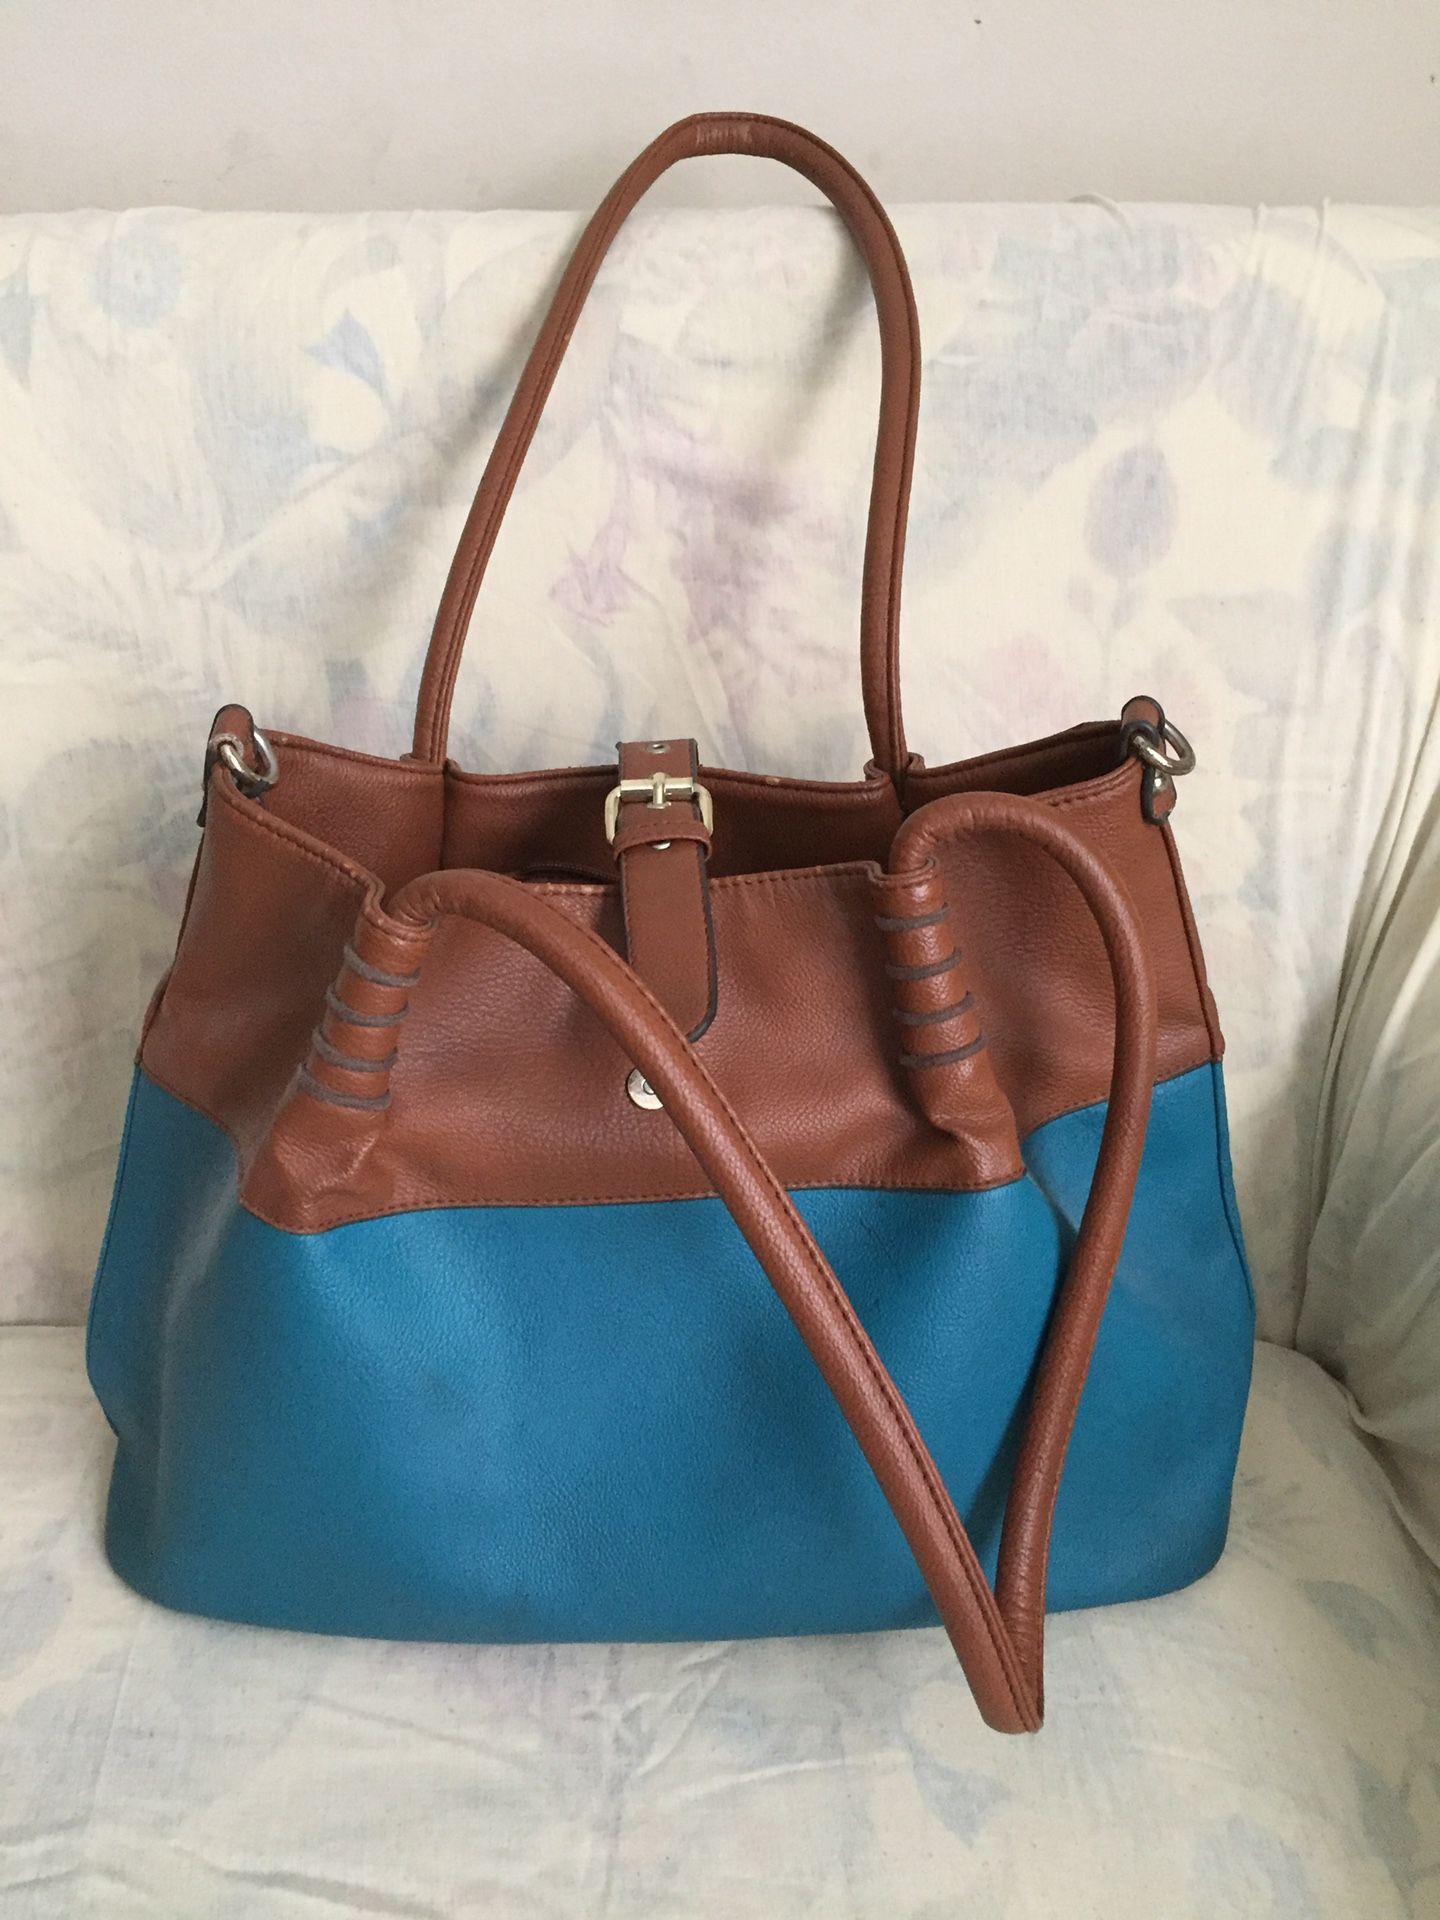 Large purse. Tons of room inside.